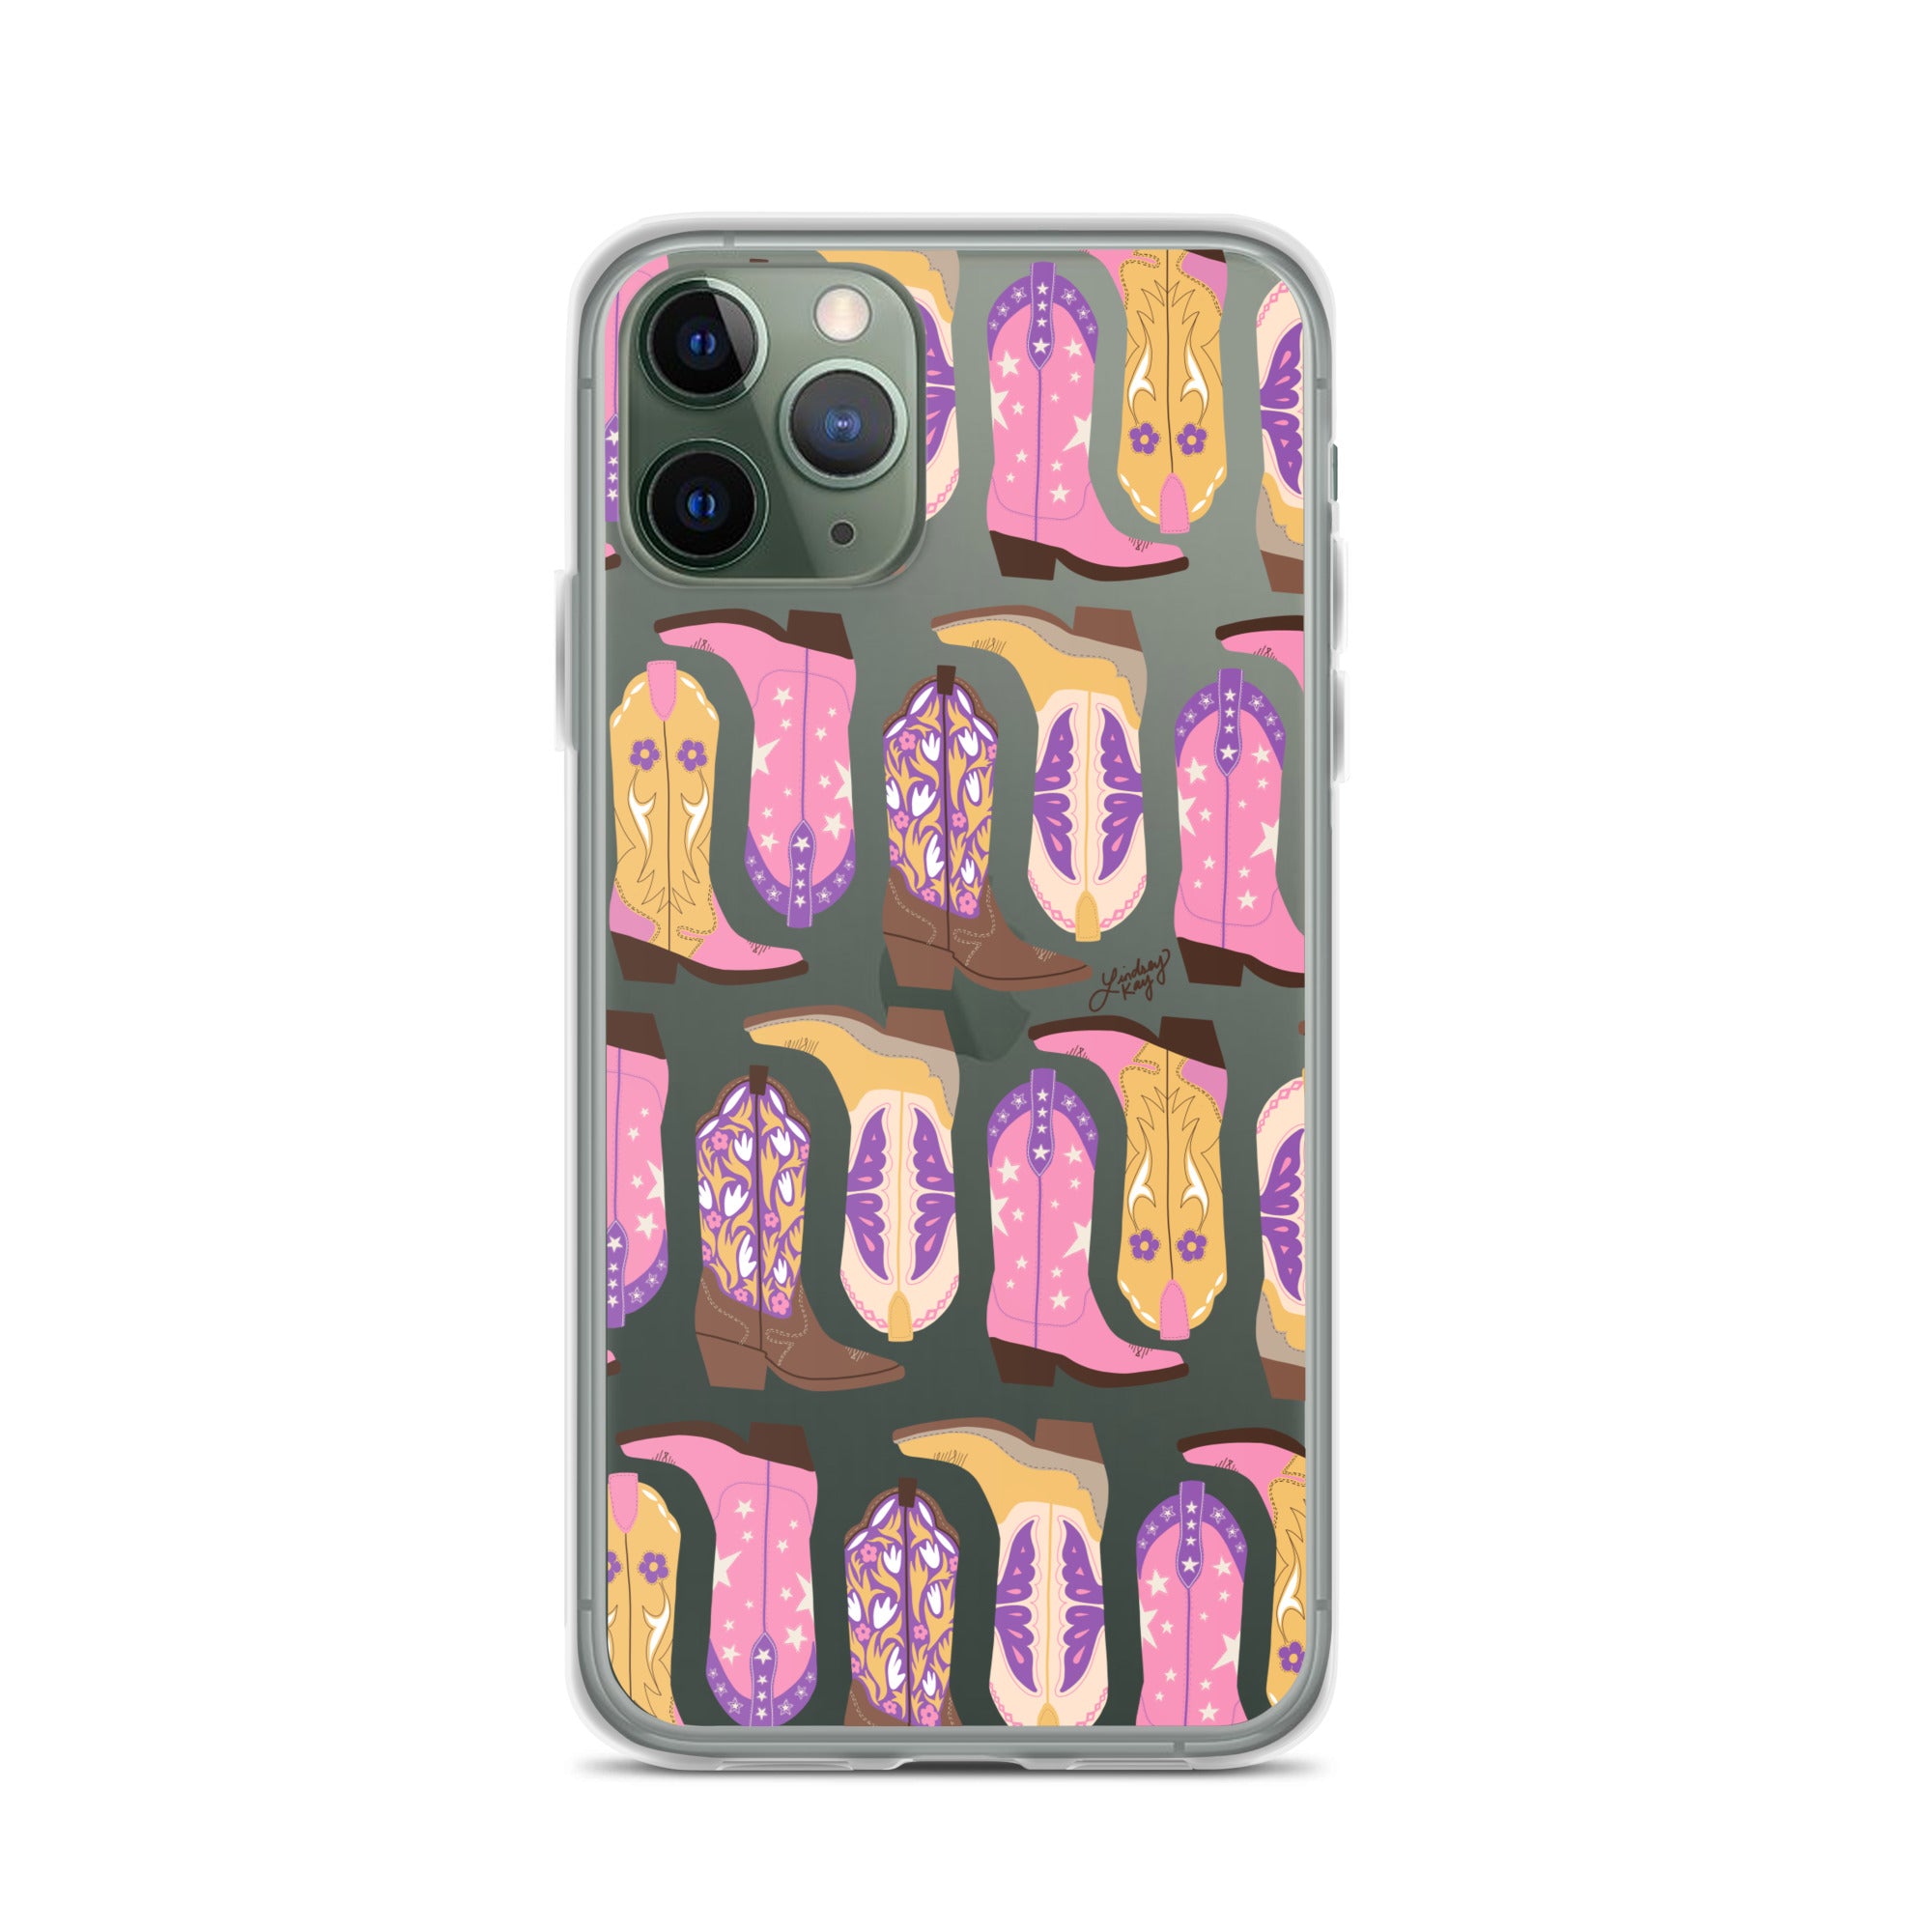 cowboy cowgirl boots pattern illustration pink purple yellow brown  iphone case protector phone cover clear mobile accessories lindsey kay collective